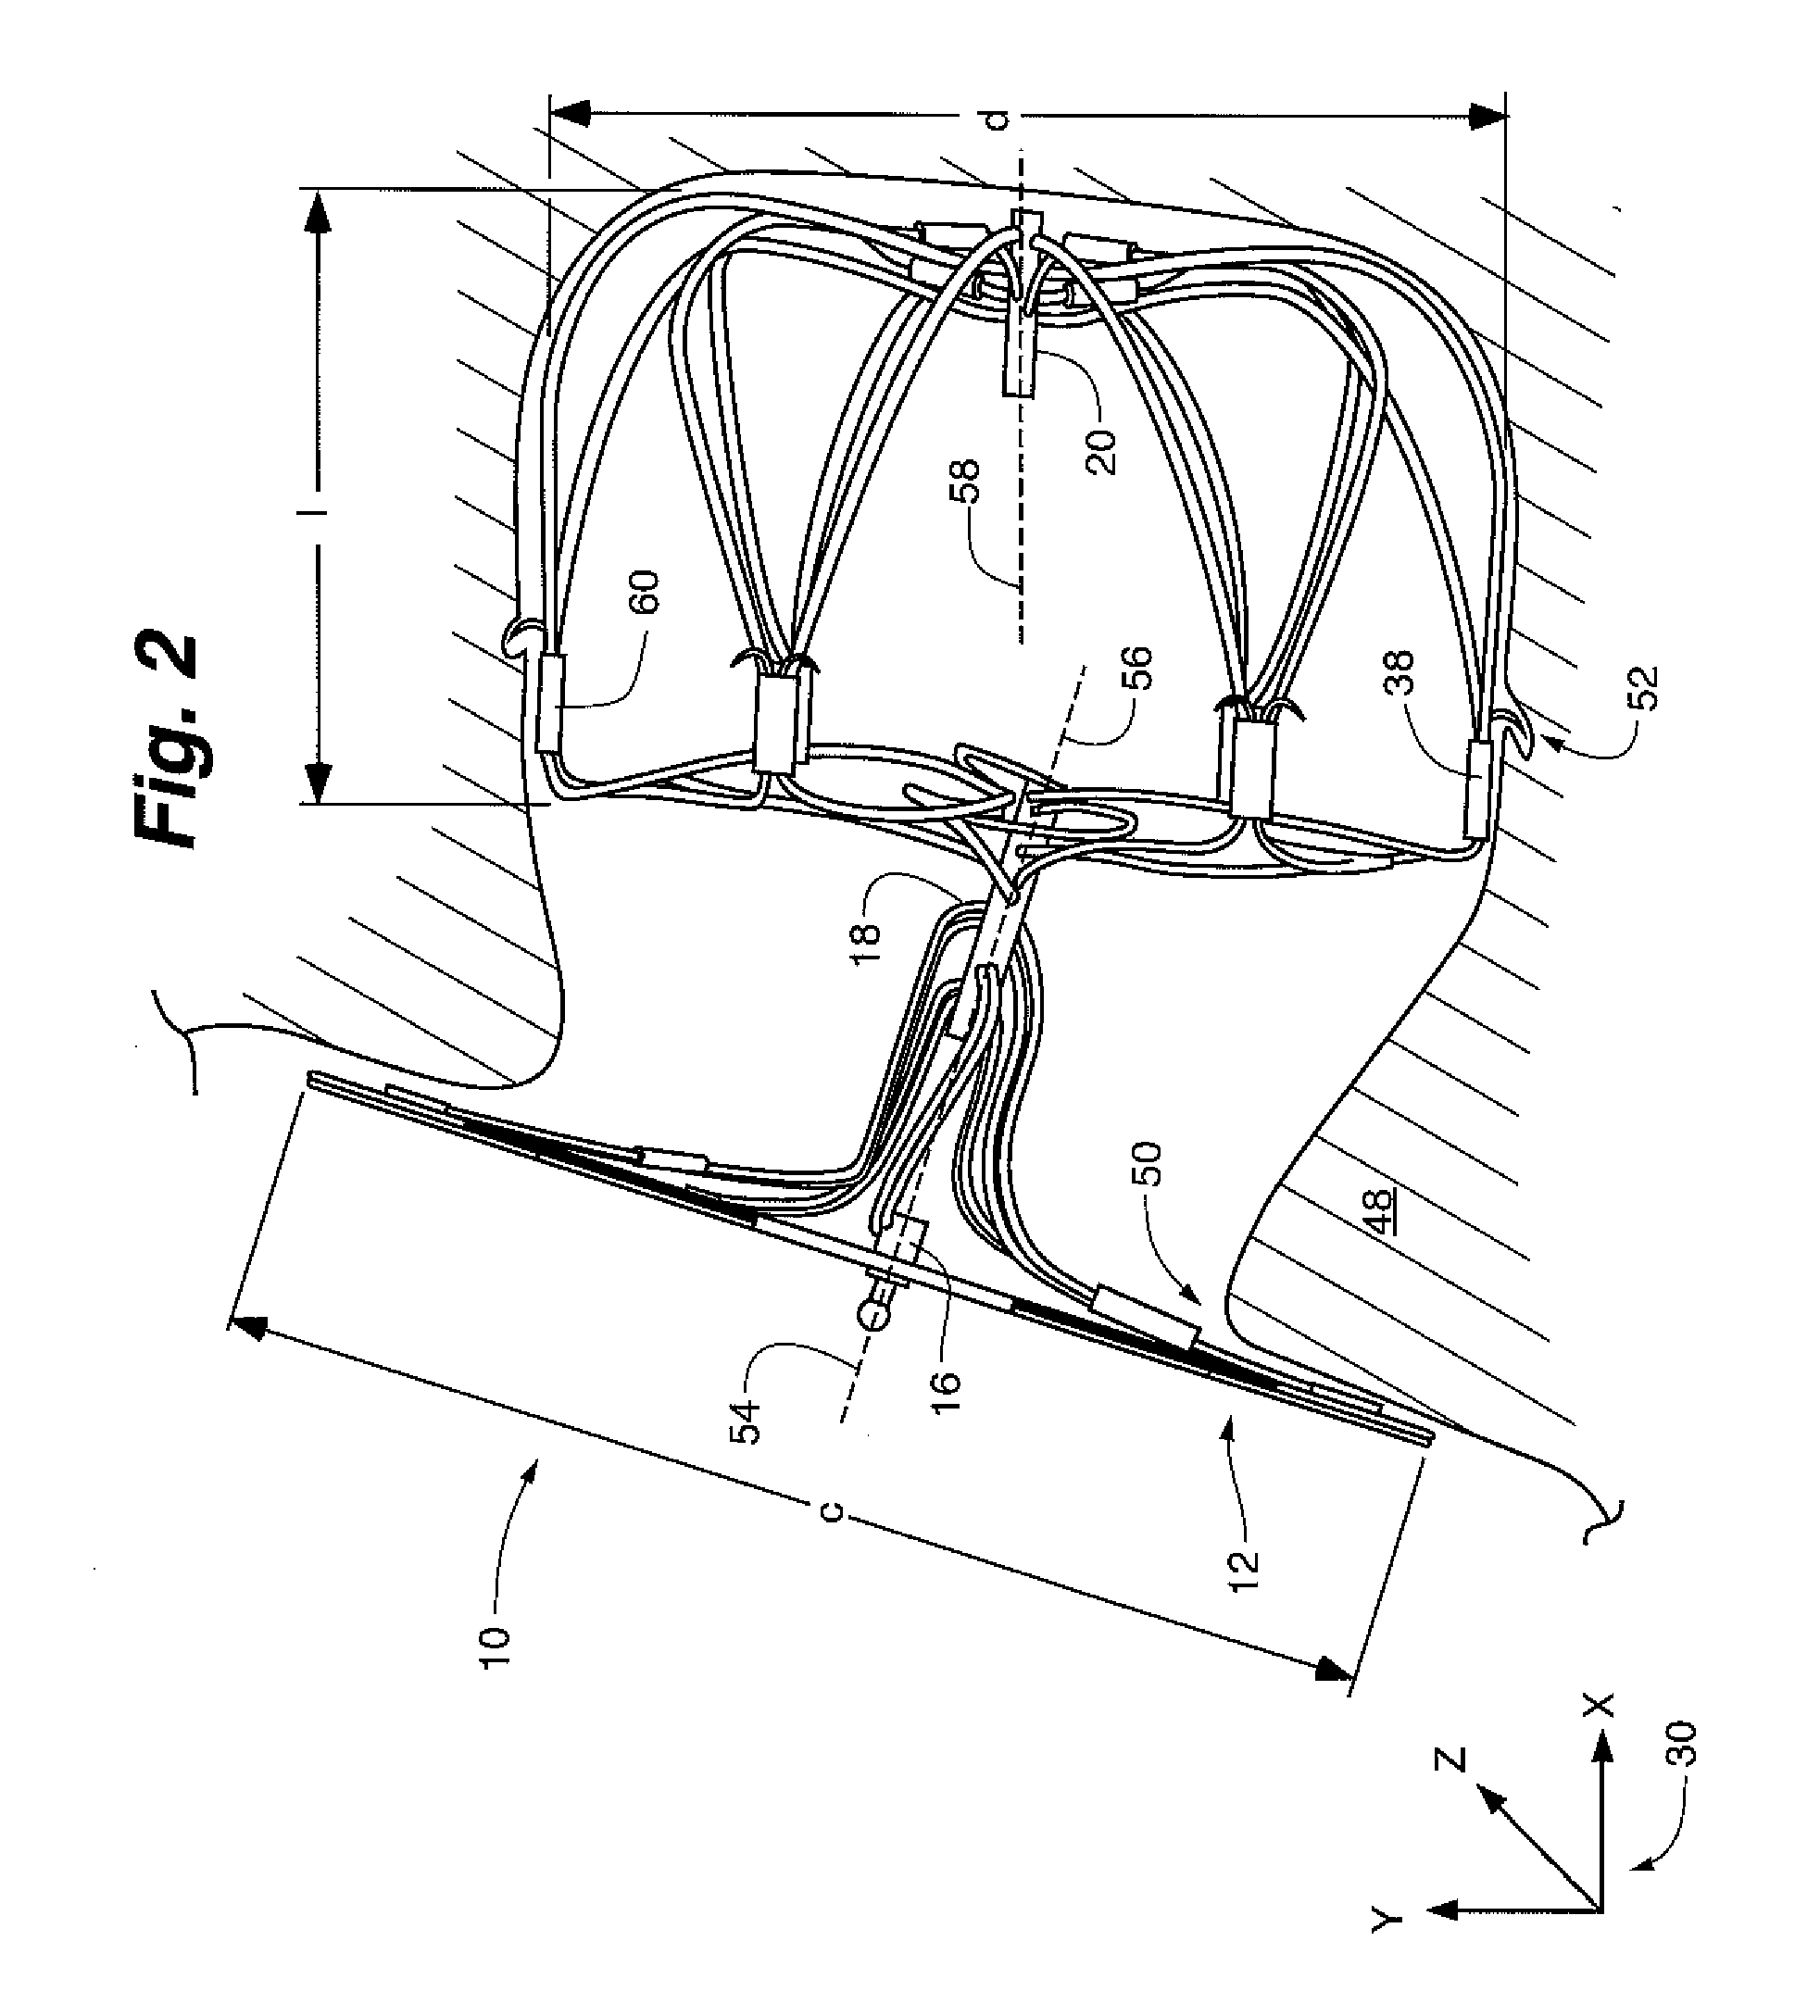 Redeployable left atrial appendage occlusion device